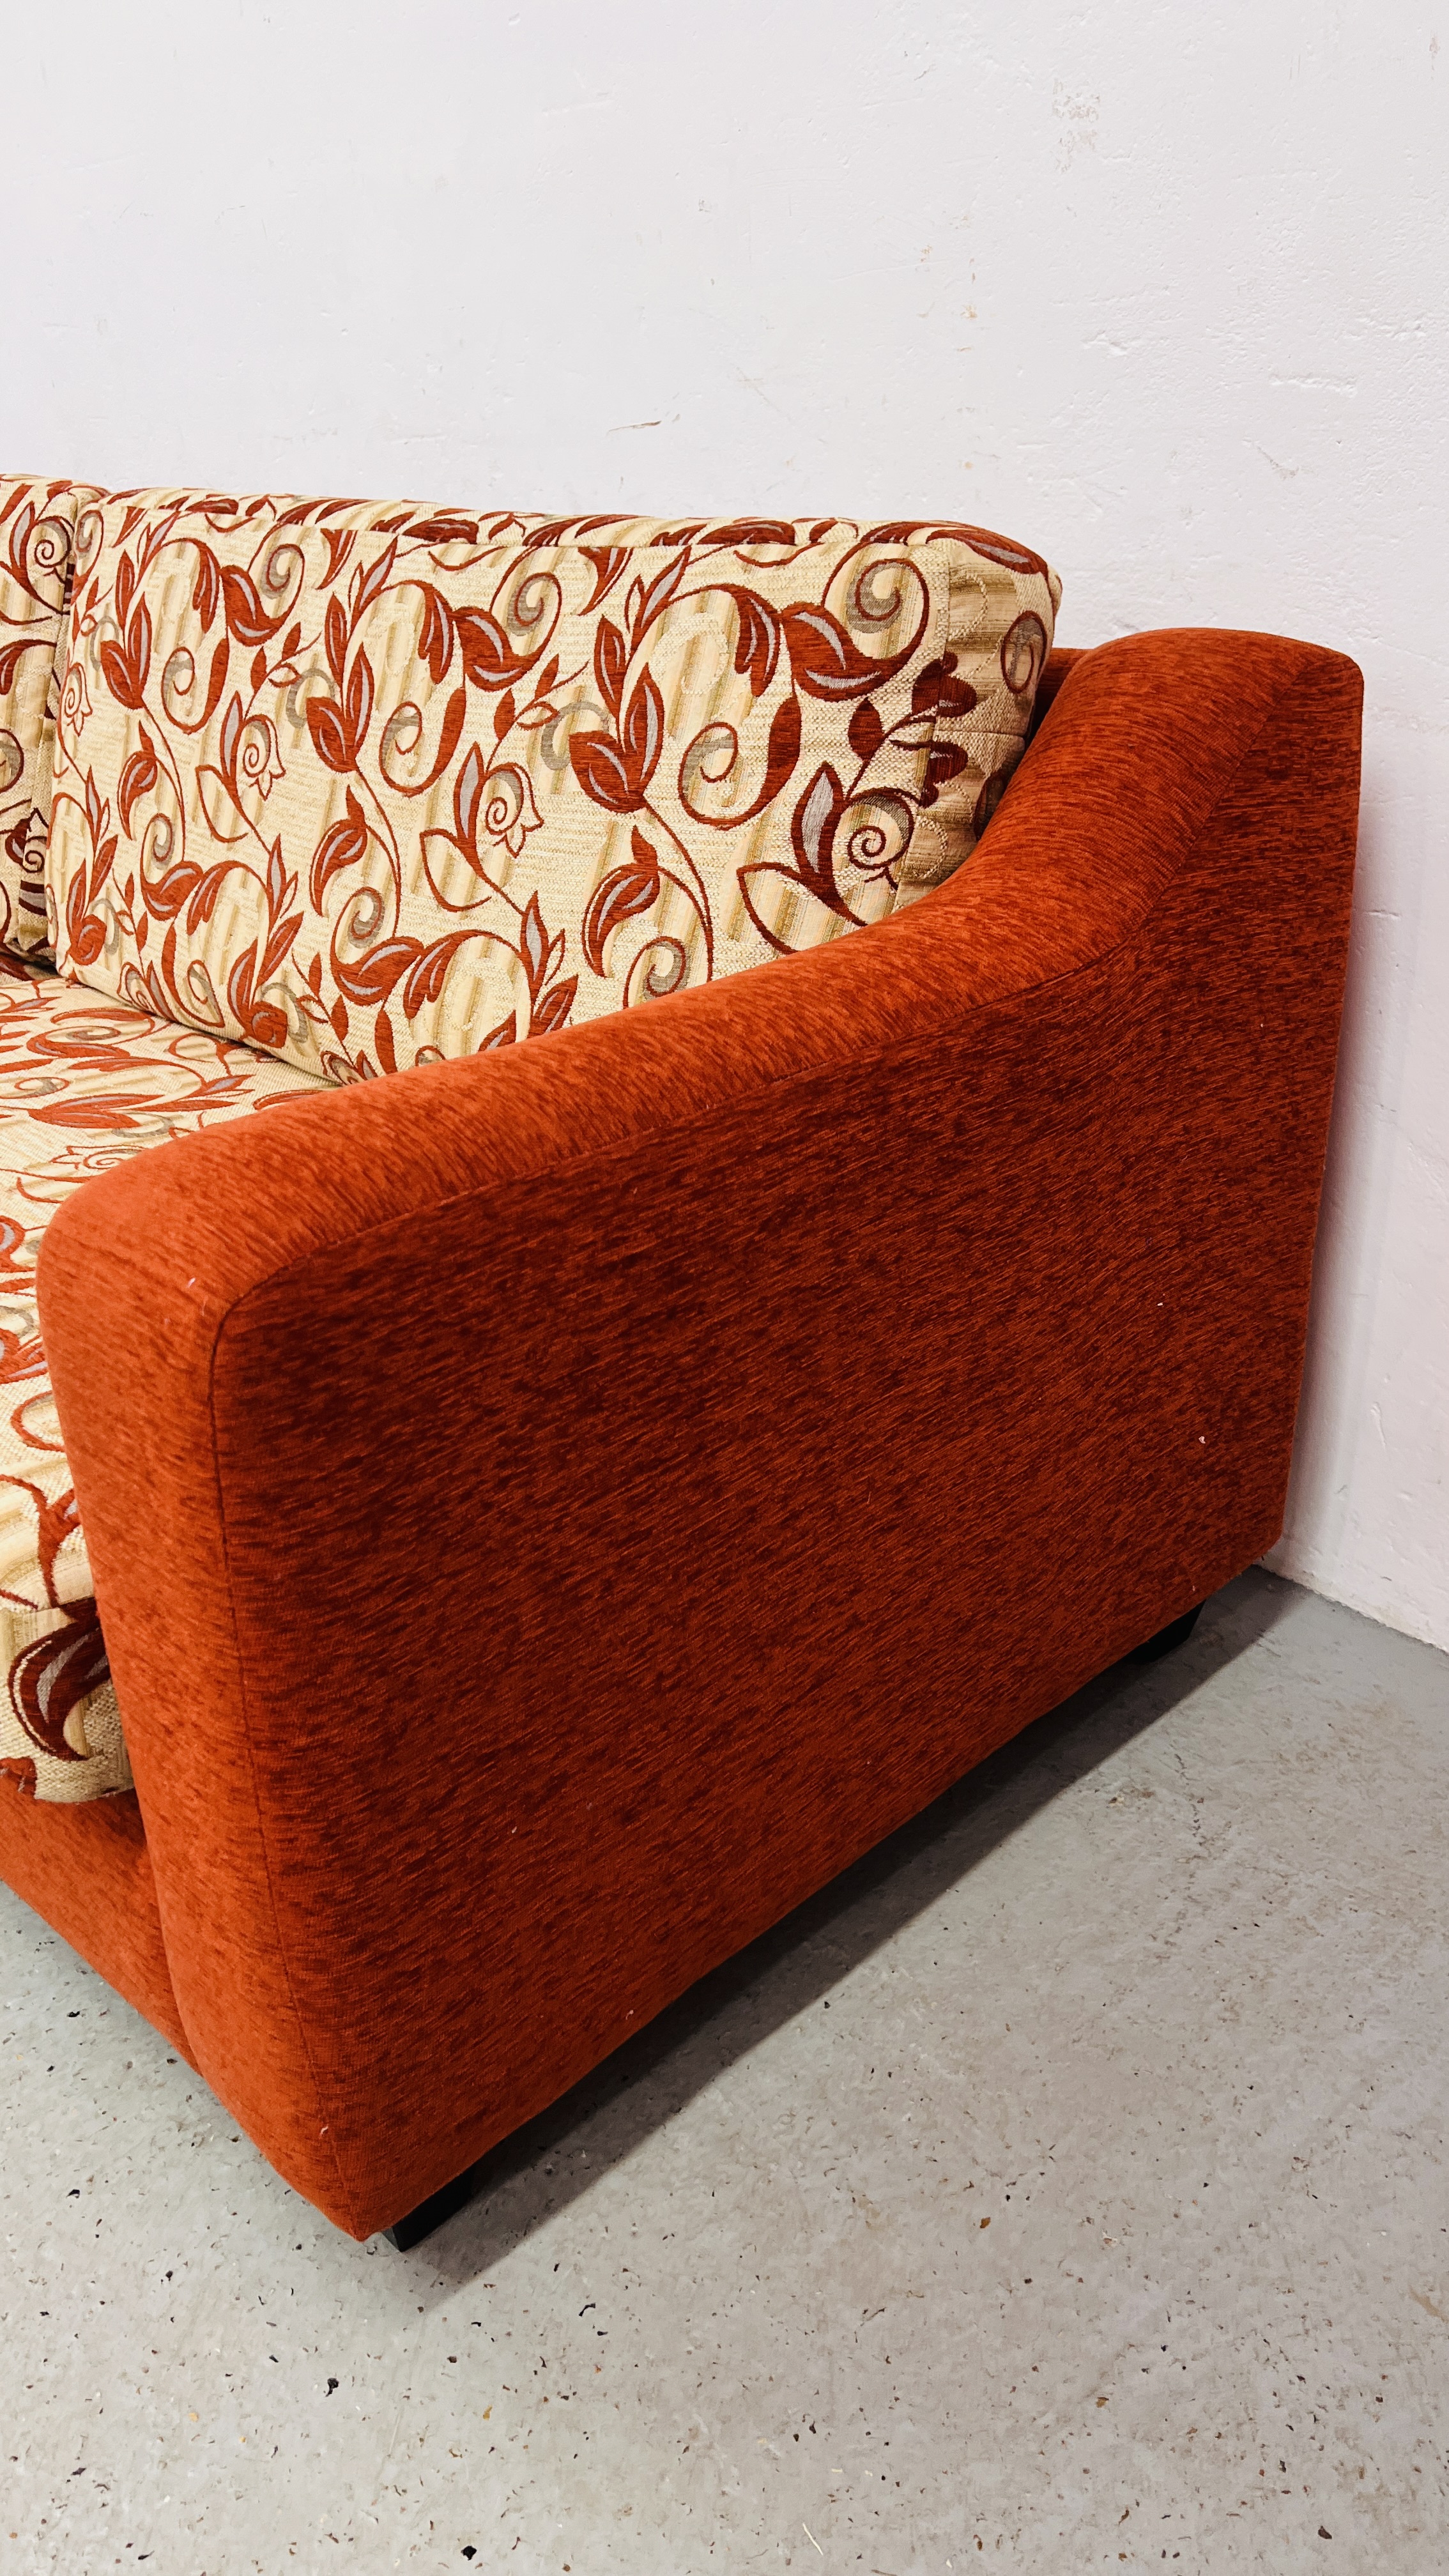 A LARGE MODERN RED UPHOLSTERED SOFA, WITH PATTERNED CUSHIONS - L 260CM. X H 80CM. X D 90CM. - Image 3 of 10